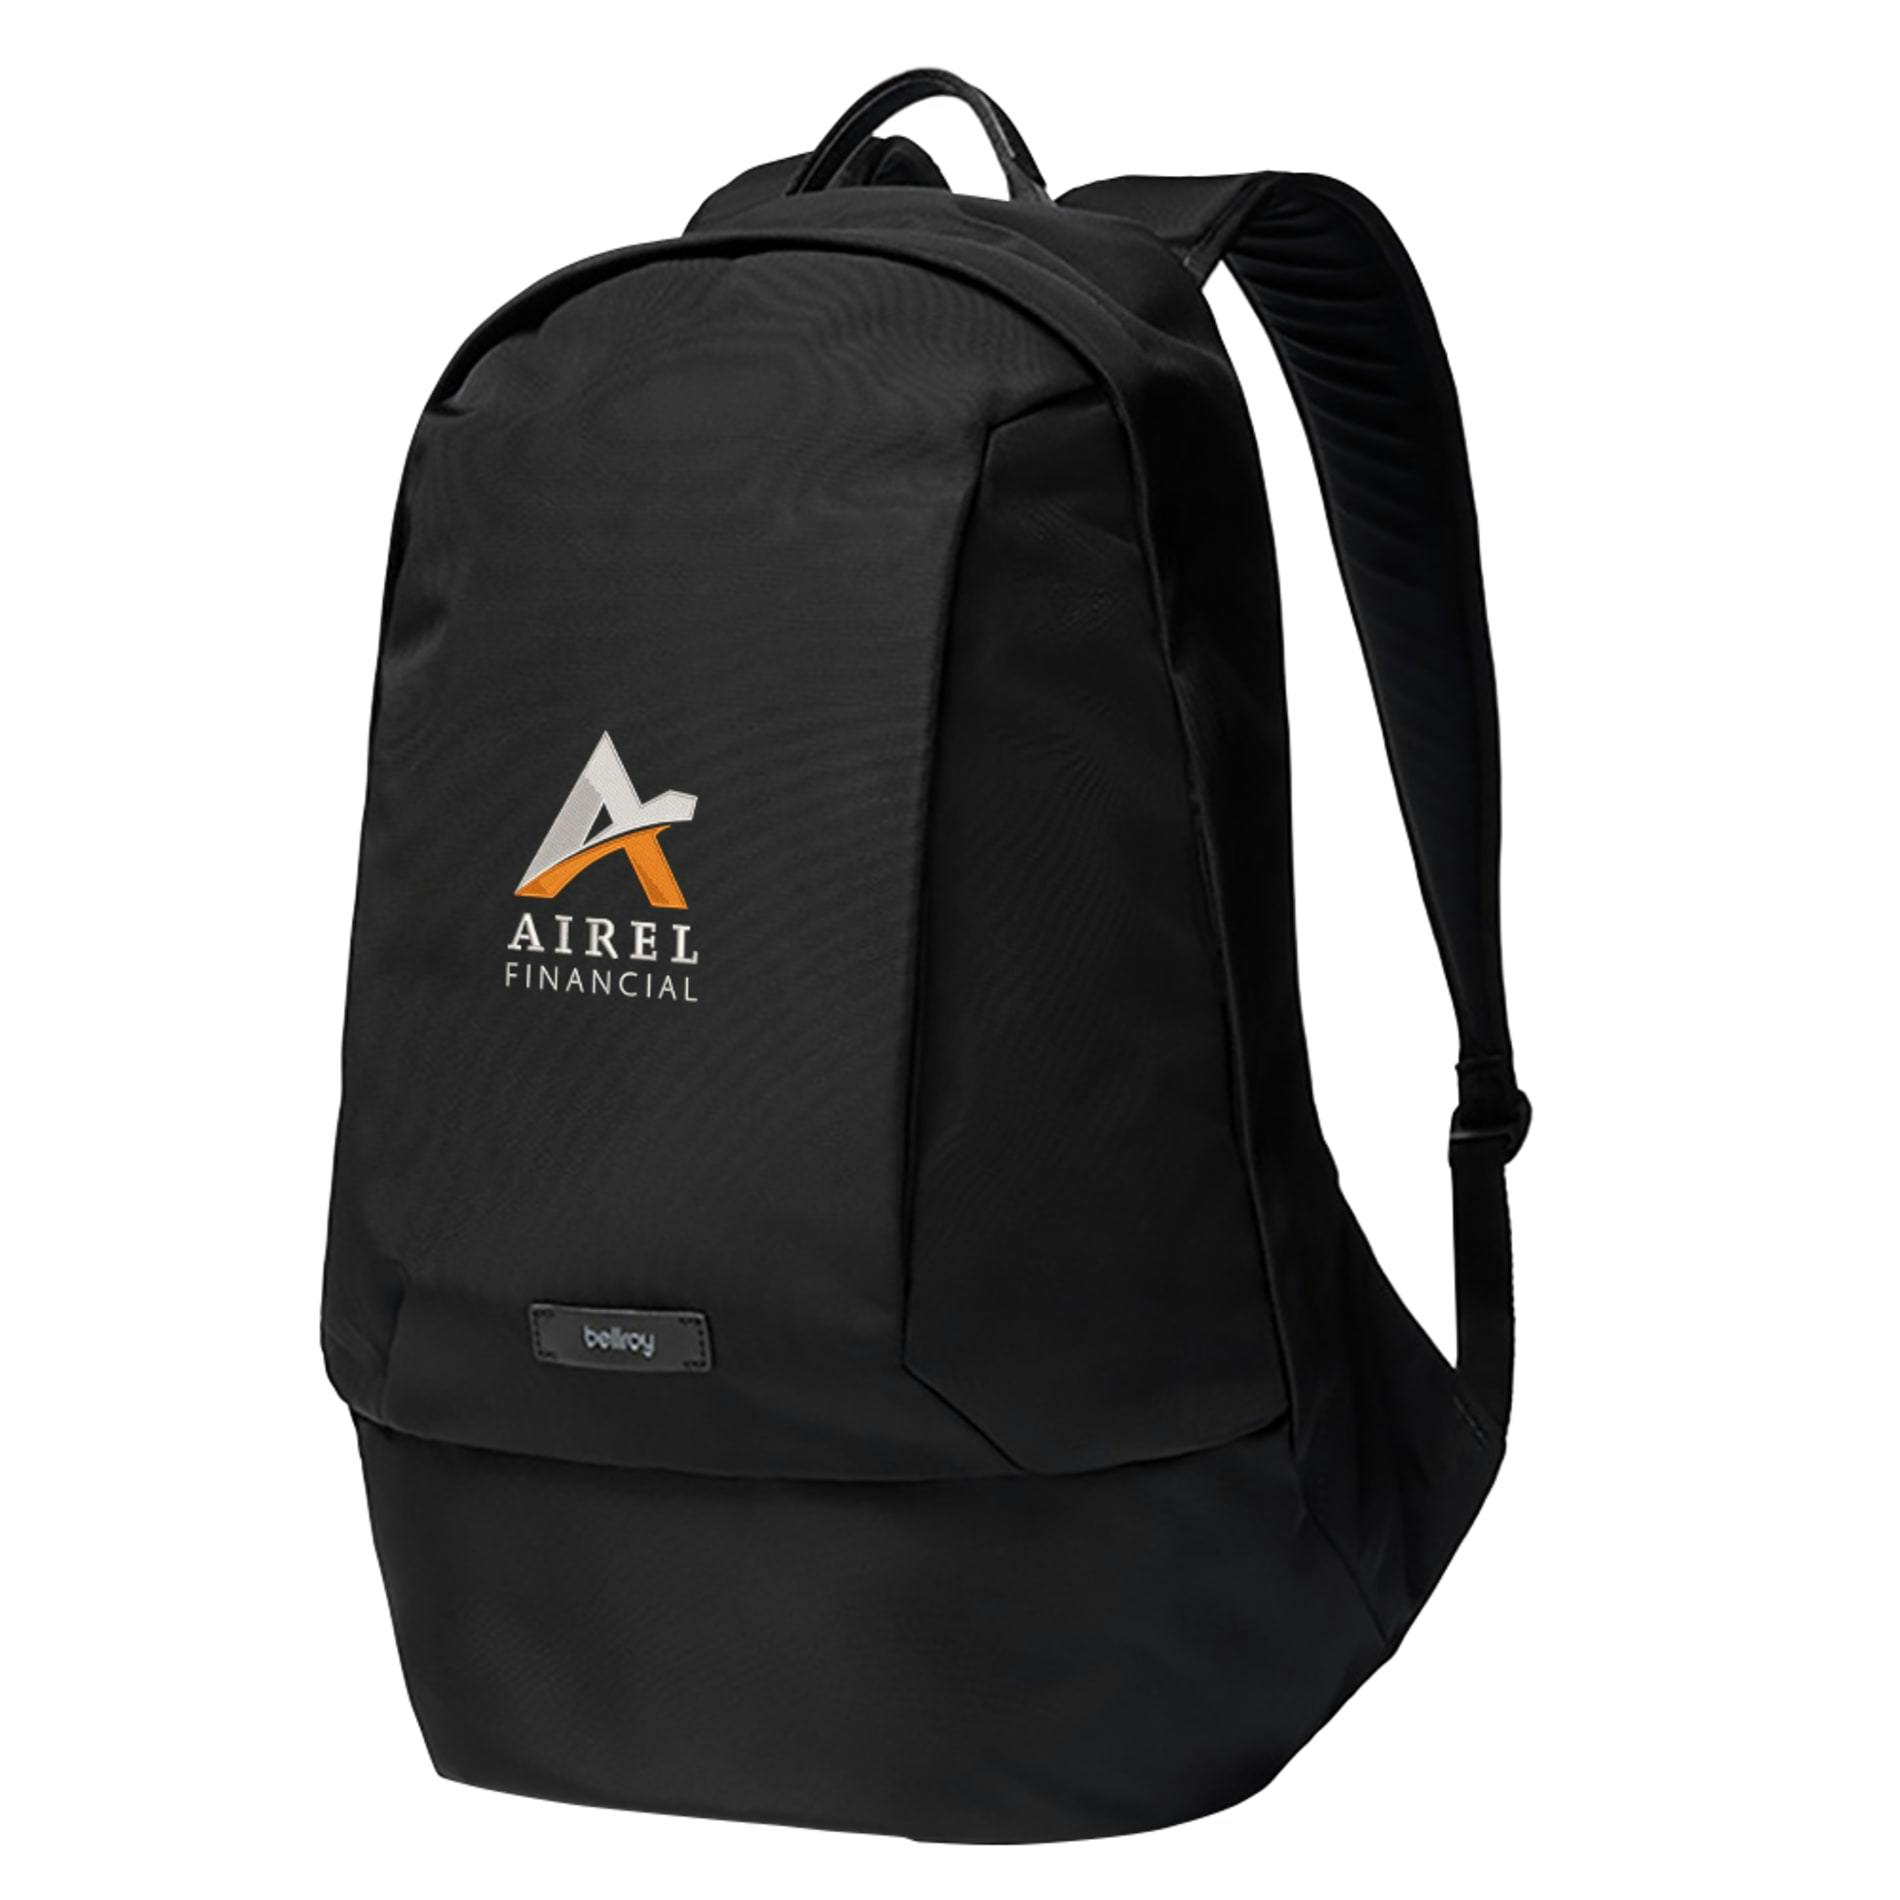 Bellroy Classic 16" Computer Backpack - additional Image 7